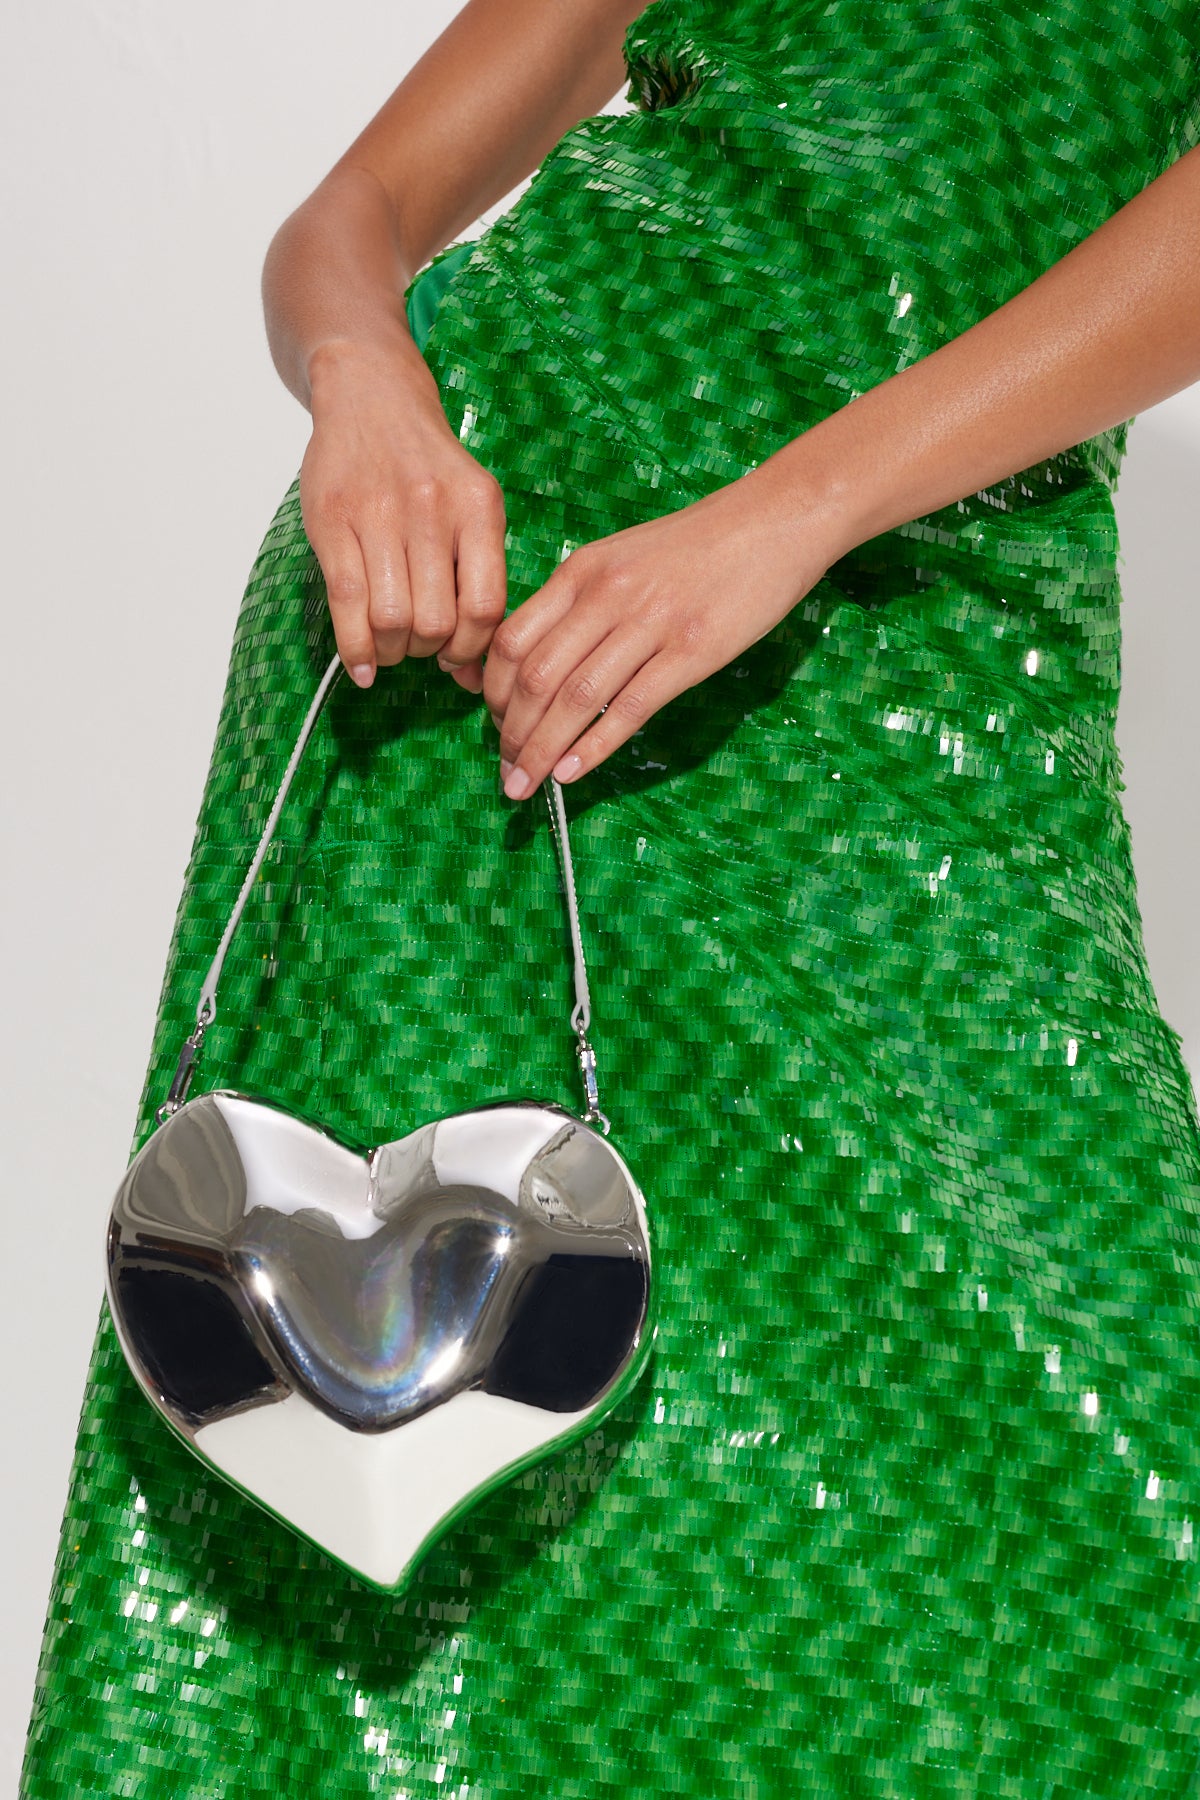 Molded Heart Bag in Silver